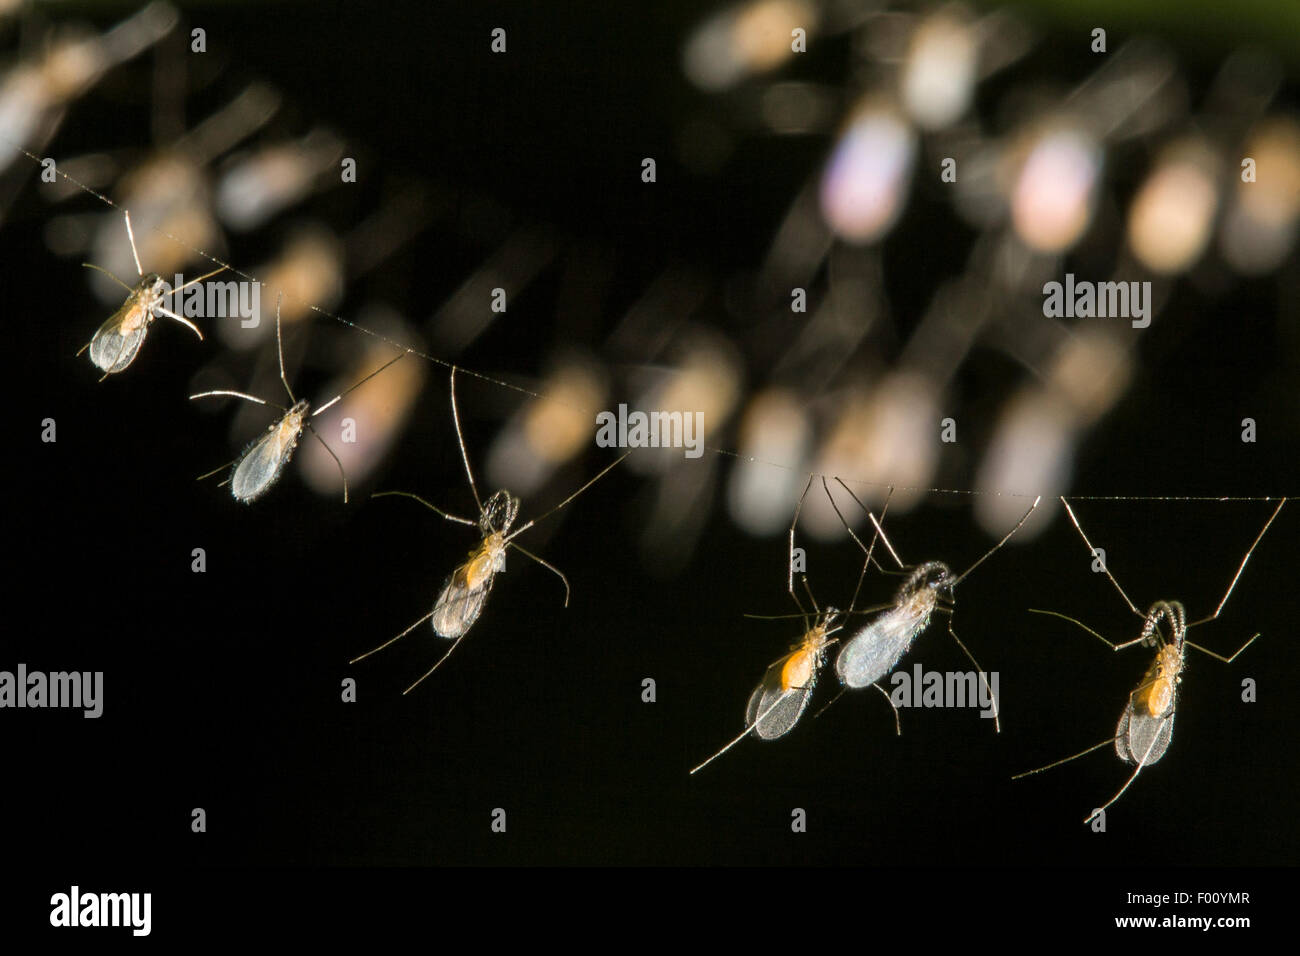 A group of gall midges (family Cecidomyiidae) cling to a cobweb. Stock Photo